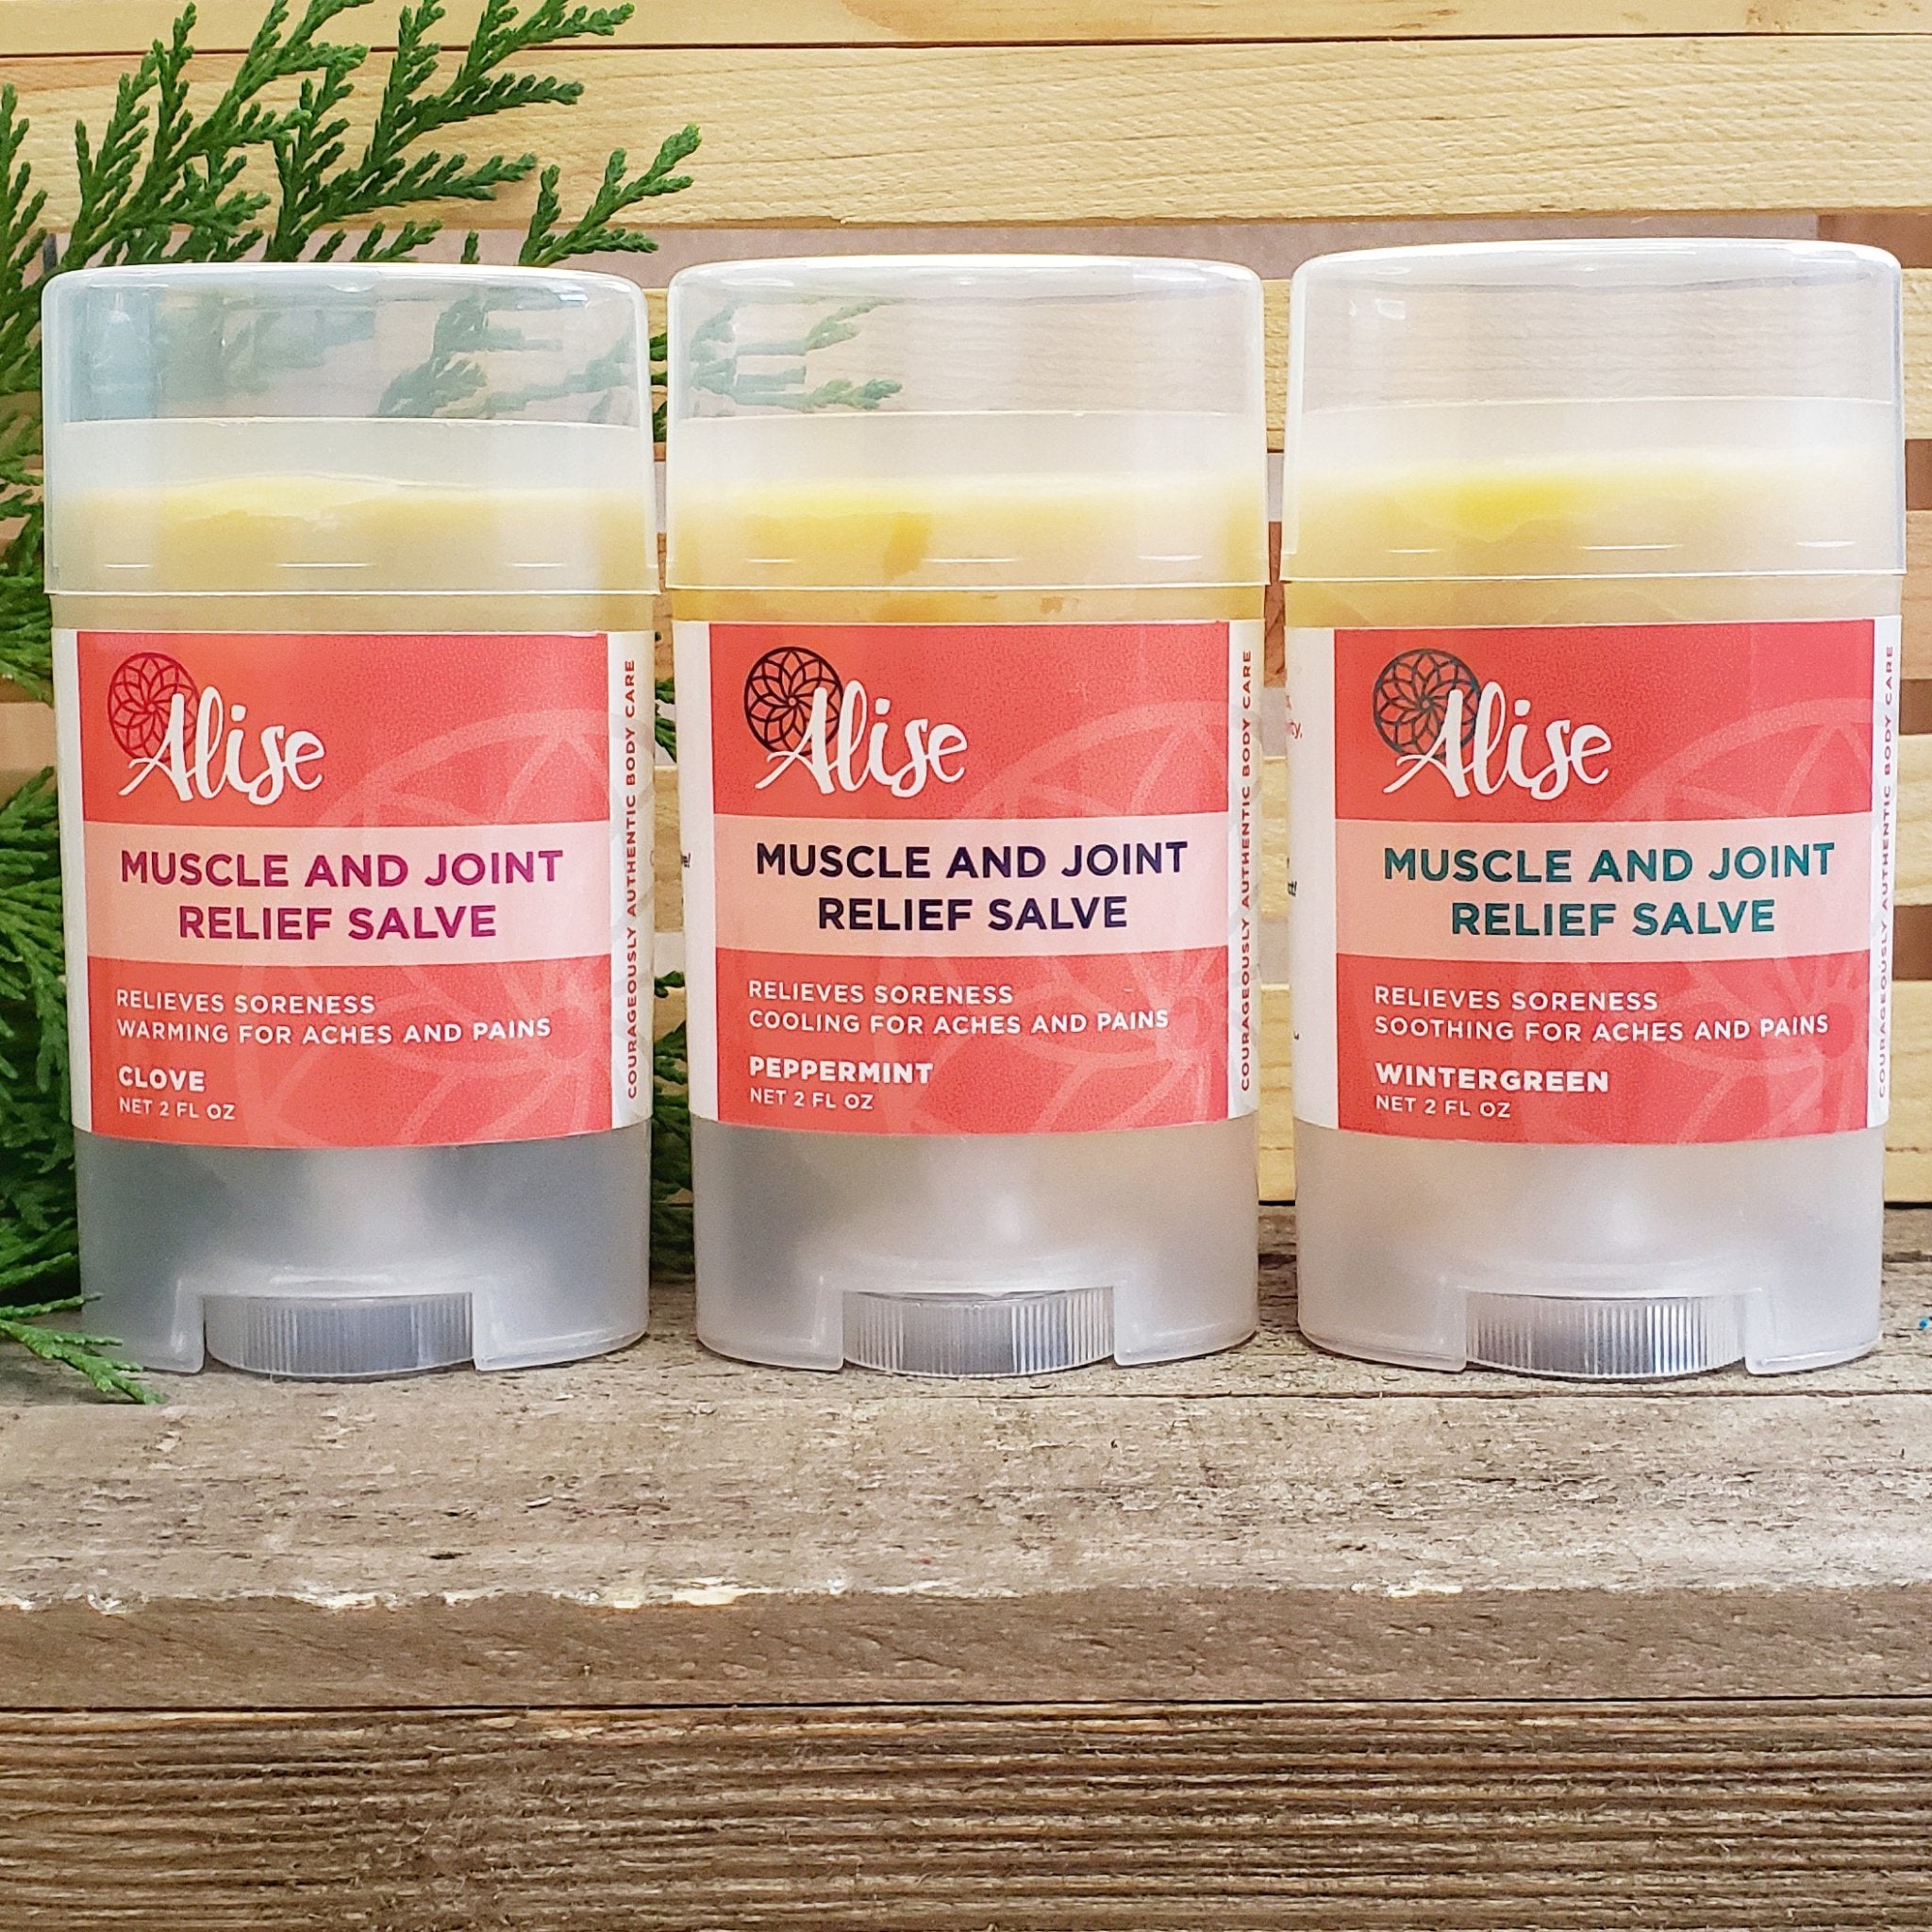 Muscle and Joint Pain relief salves in rubon form for Alise Body Care